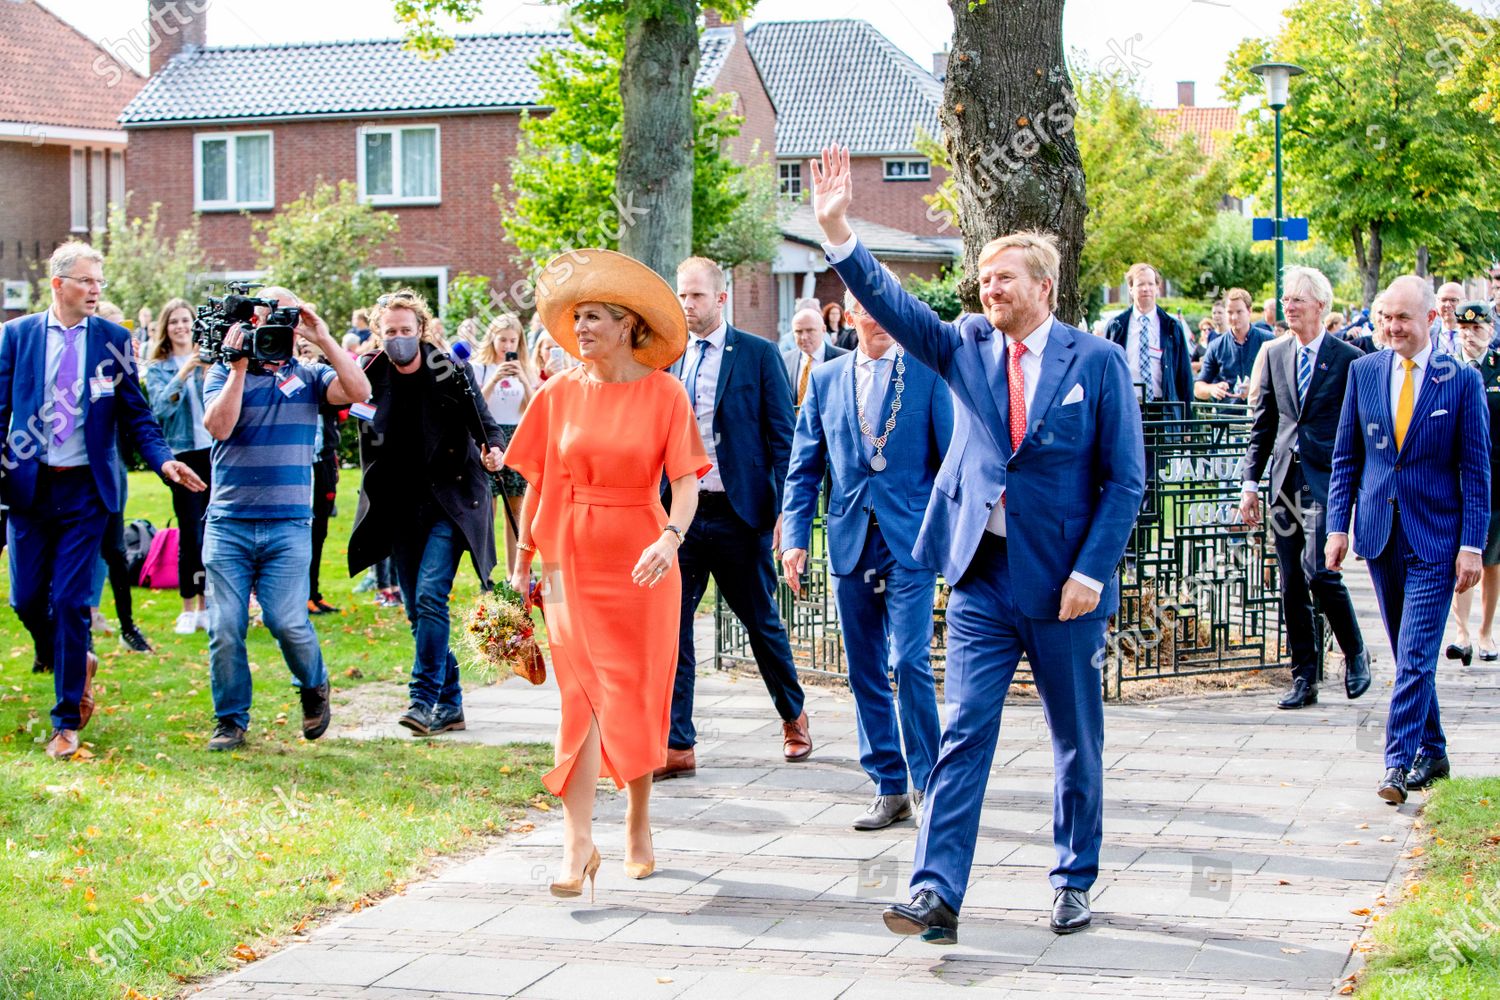 king-willem-alexander-and-queen-maxima-visit-to-south-east-friesland-the-netherlands-shutterstock-editorial-10779996ax.jpg